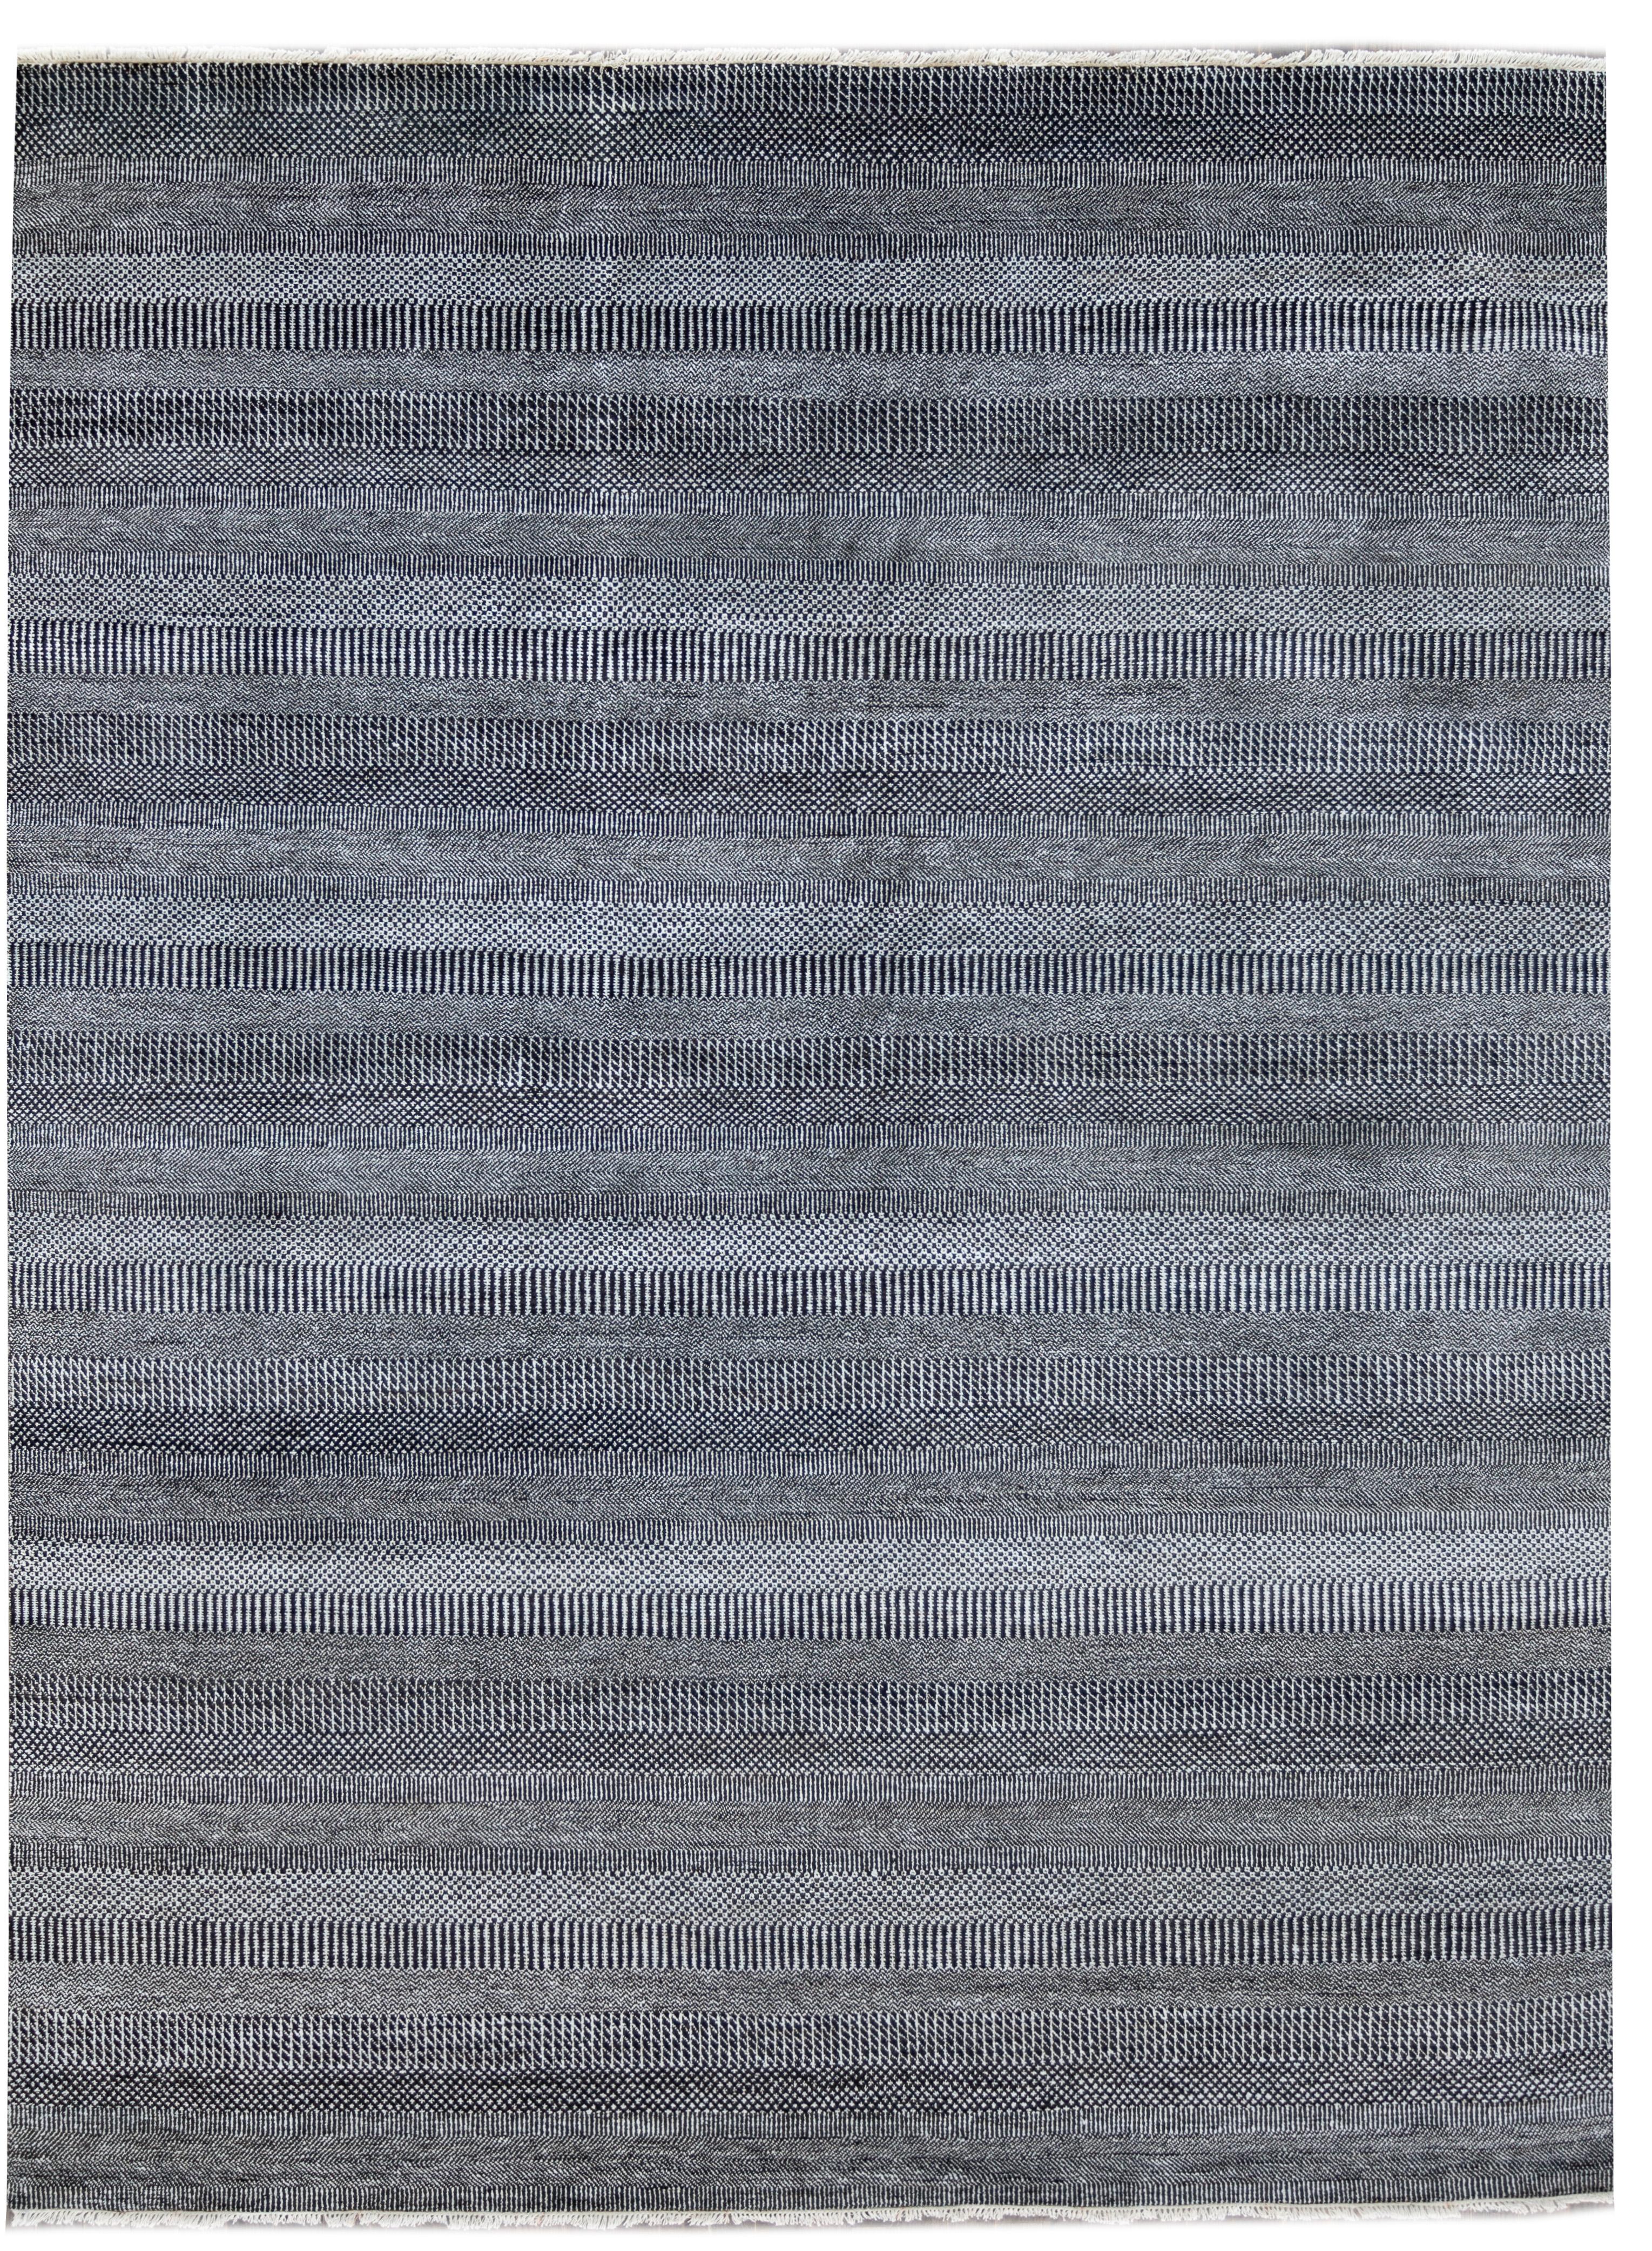 A 21st century contemporary transitional Savannah rug with a finely-detailed black and light silver allover design. This hand knotted wool rug measures 9'1